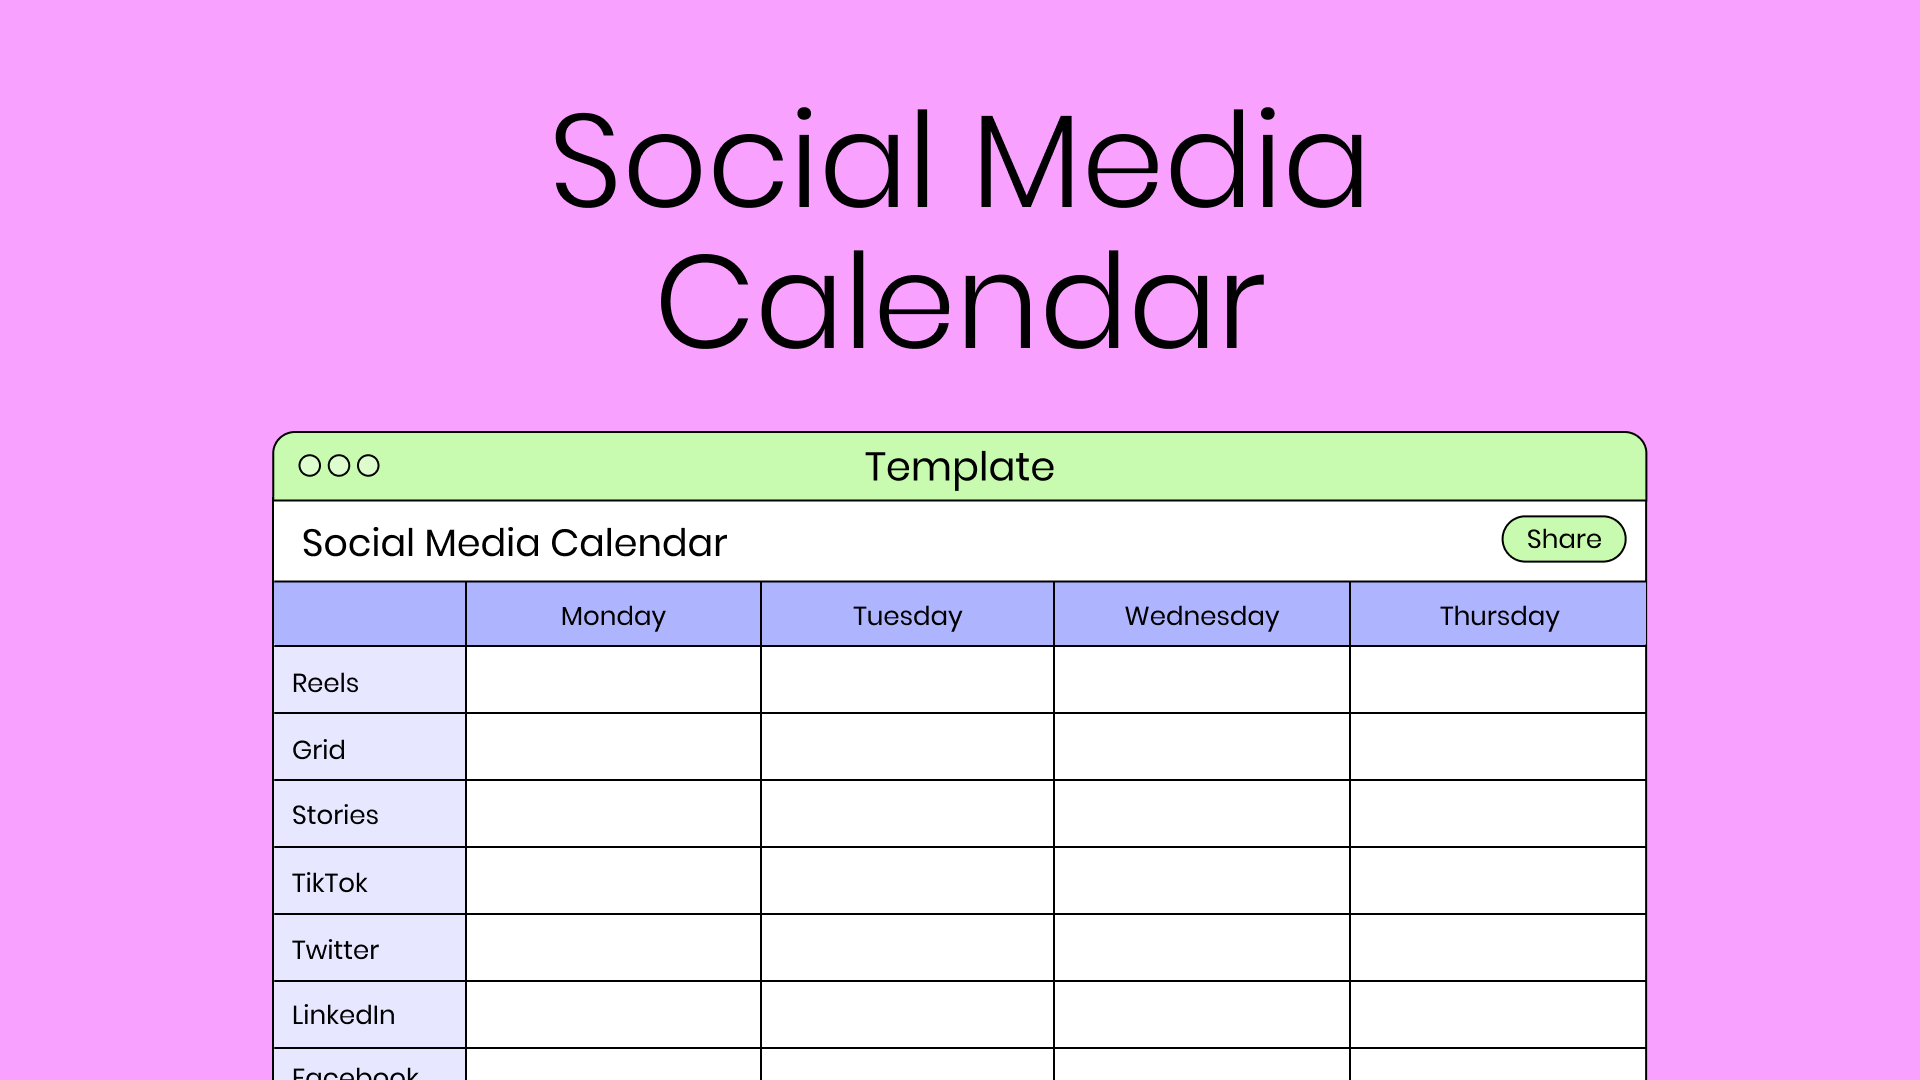 Decorative thumbnail image for the Later social media content calendar template